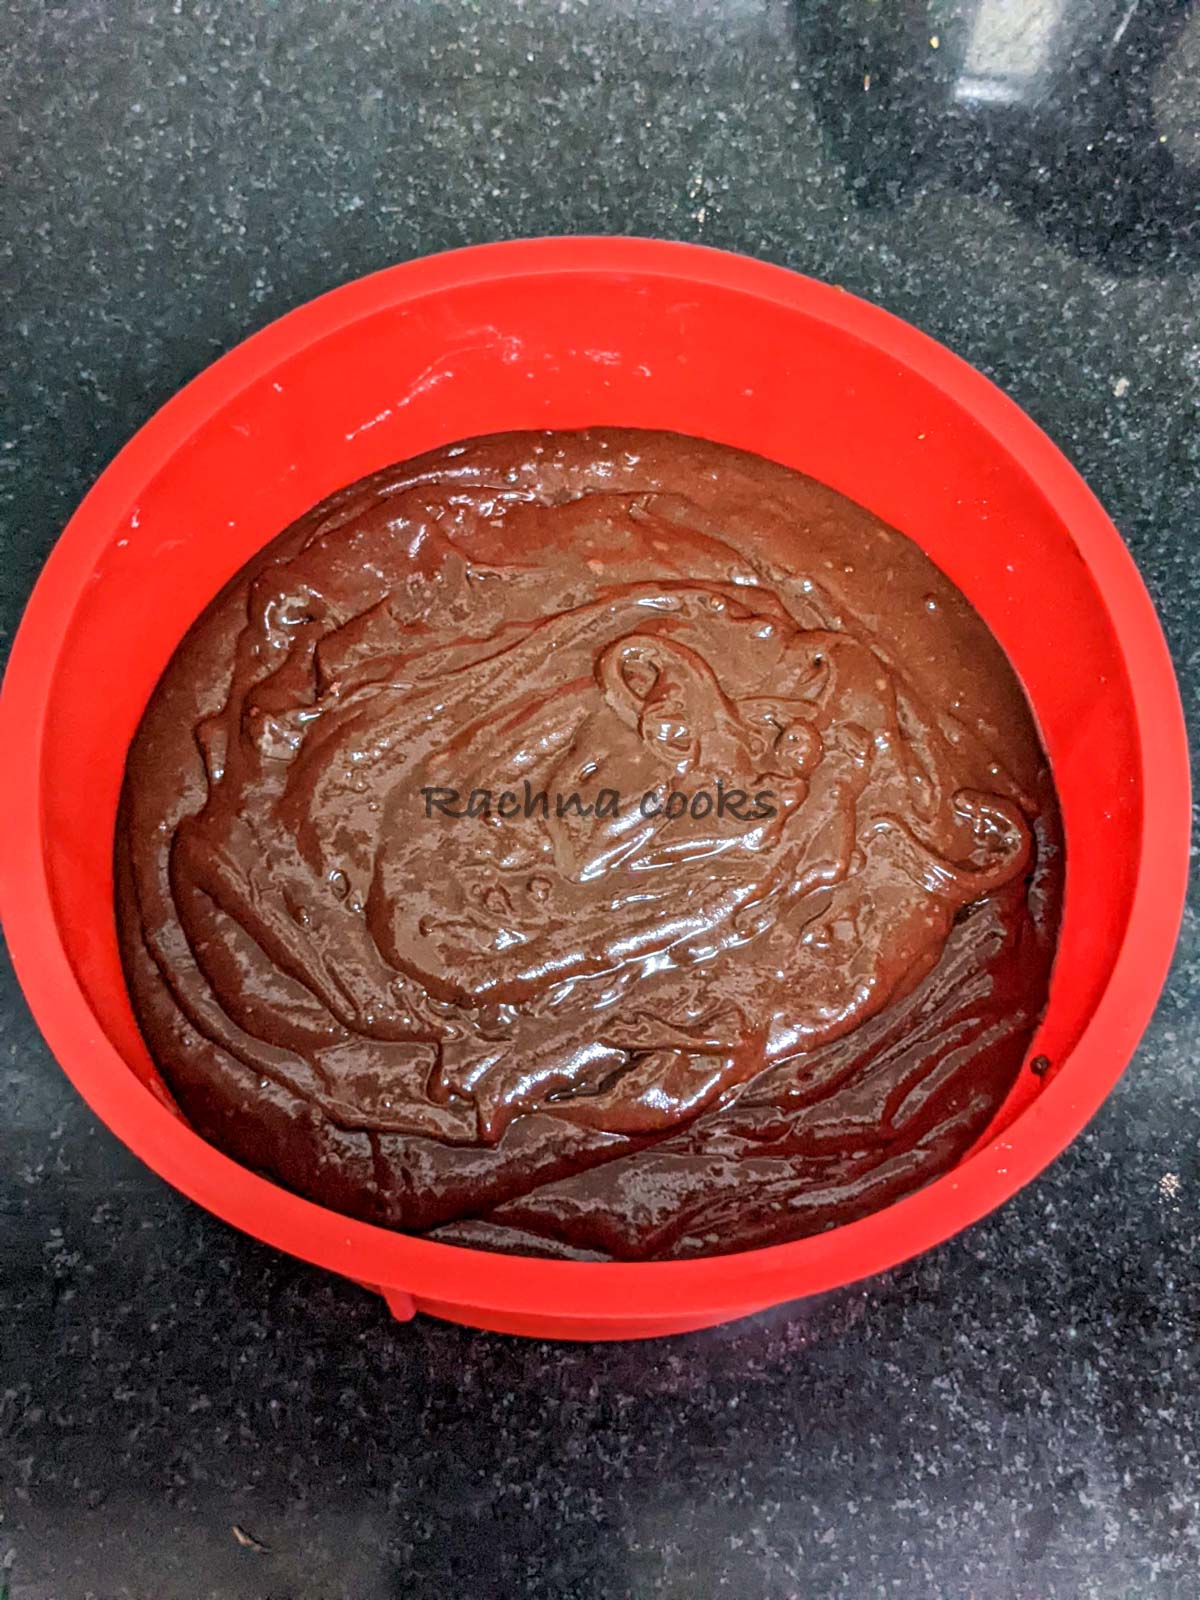 Cake batter poured into a red silicone cake mould.